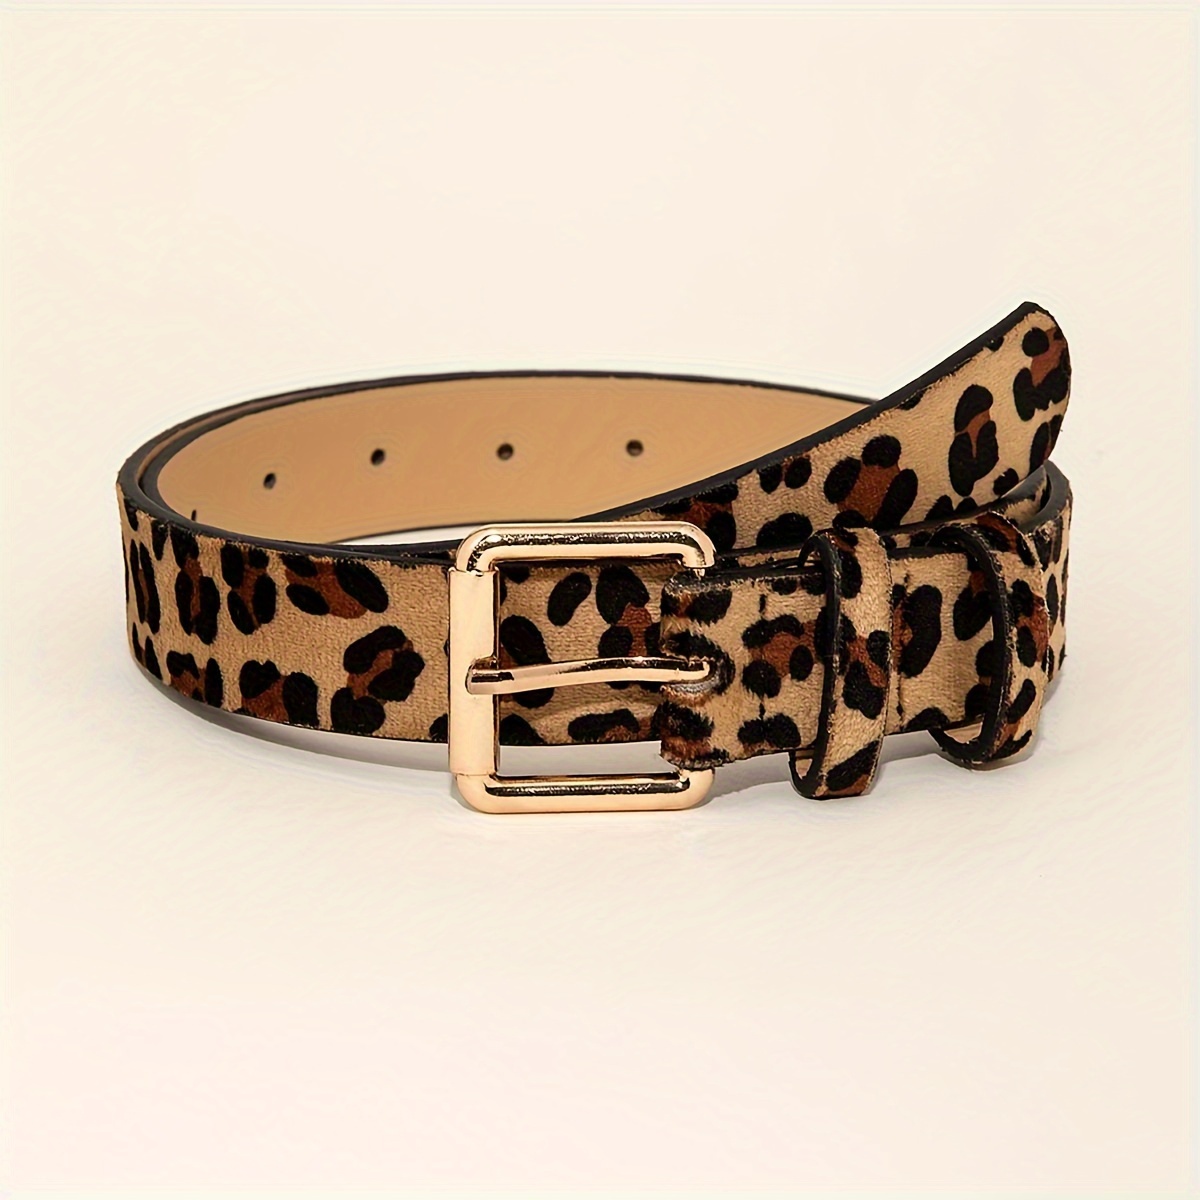 

Leopard Print Pu Leather Belts Classic Square Pin Buckle Black Waistband Casual Jeans Pants Belts For Women Daily Use